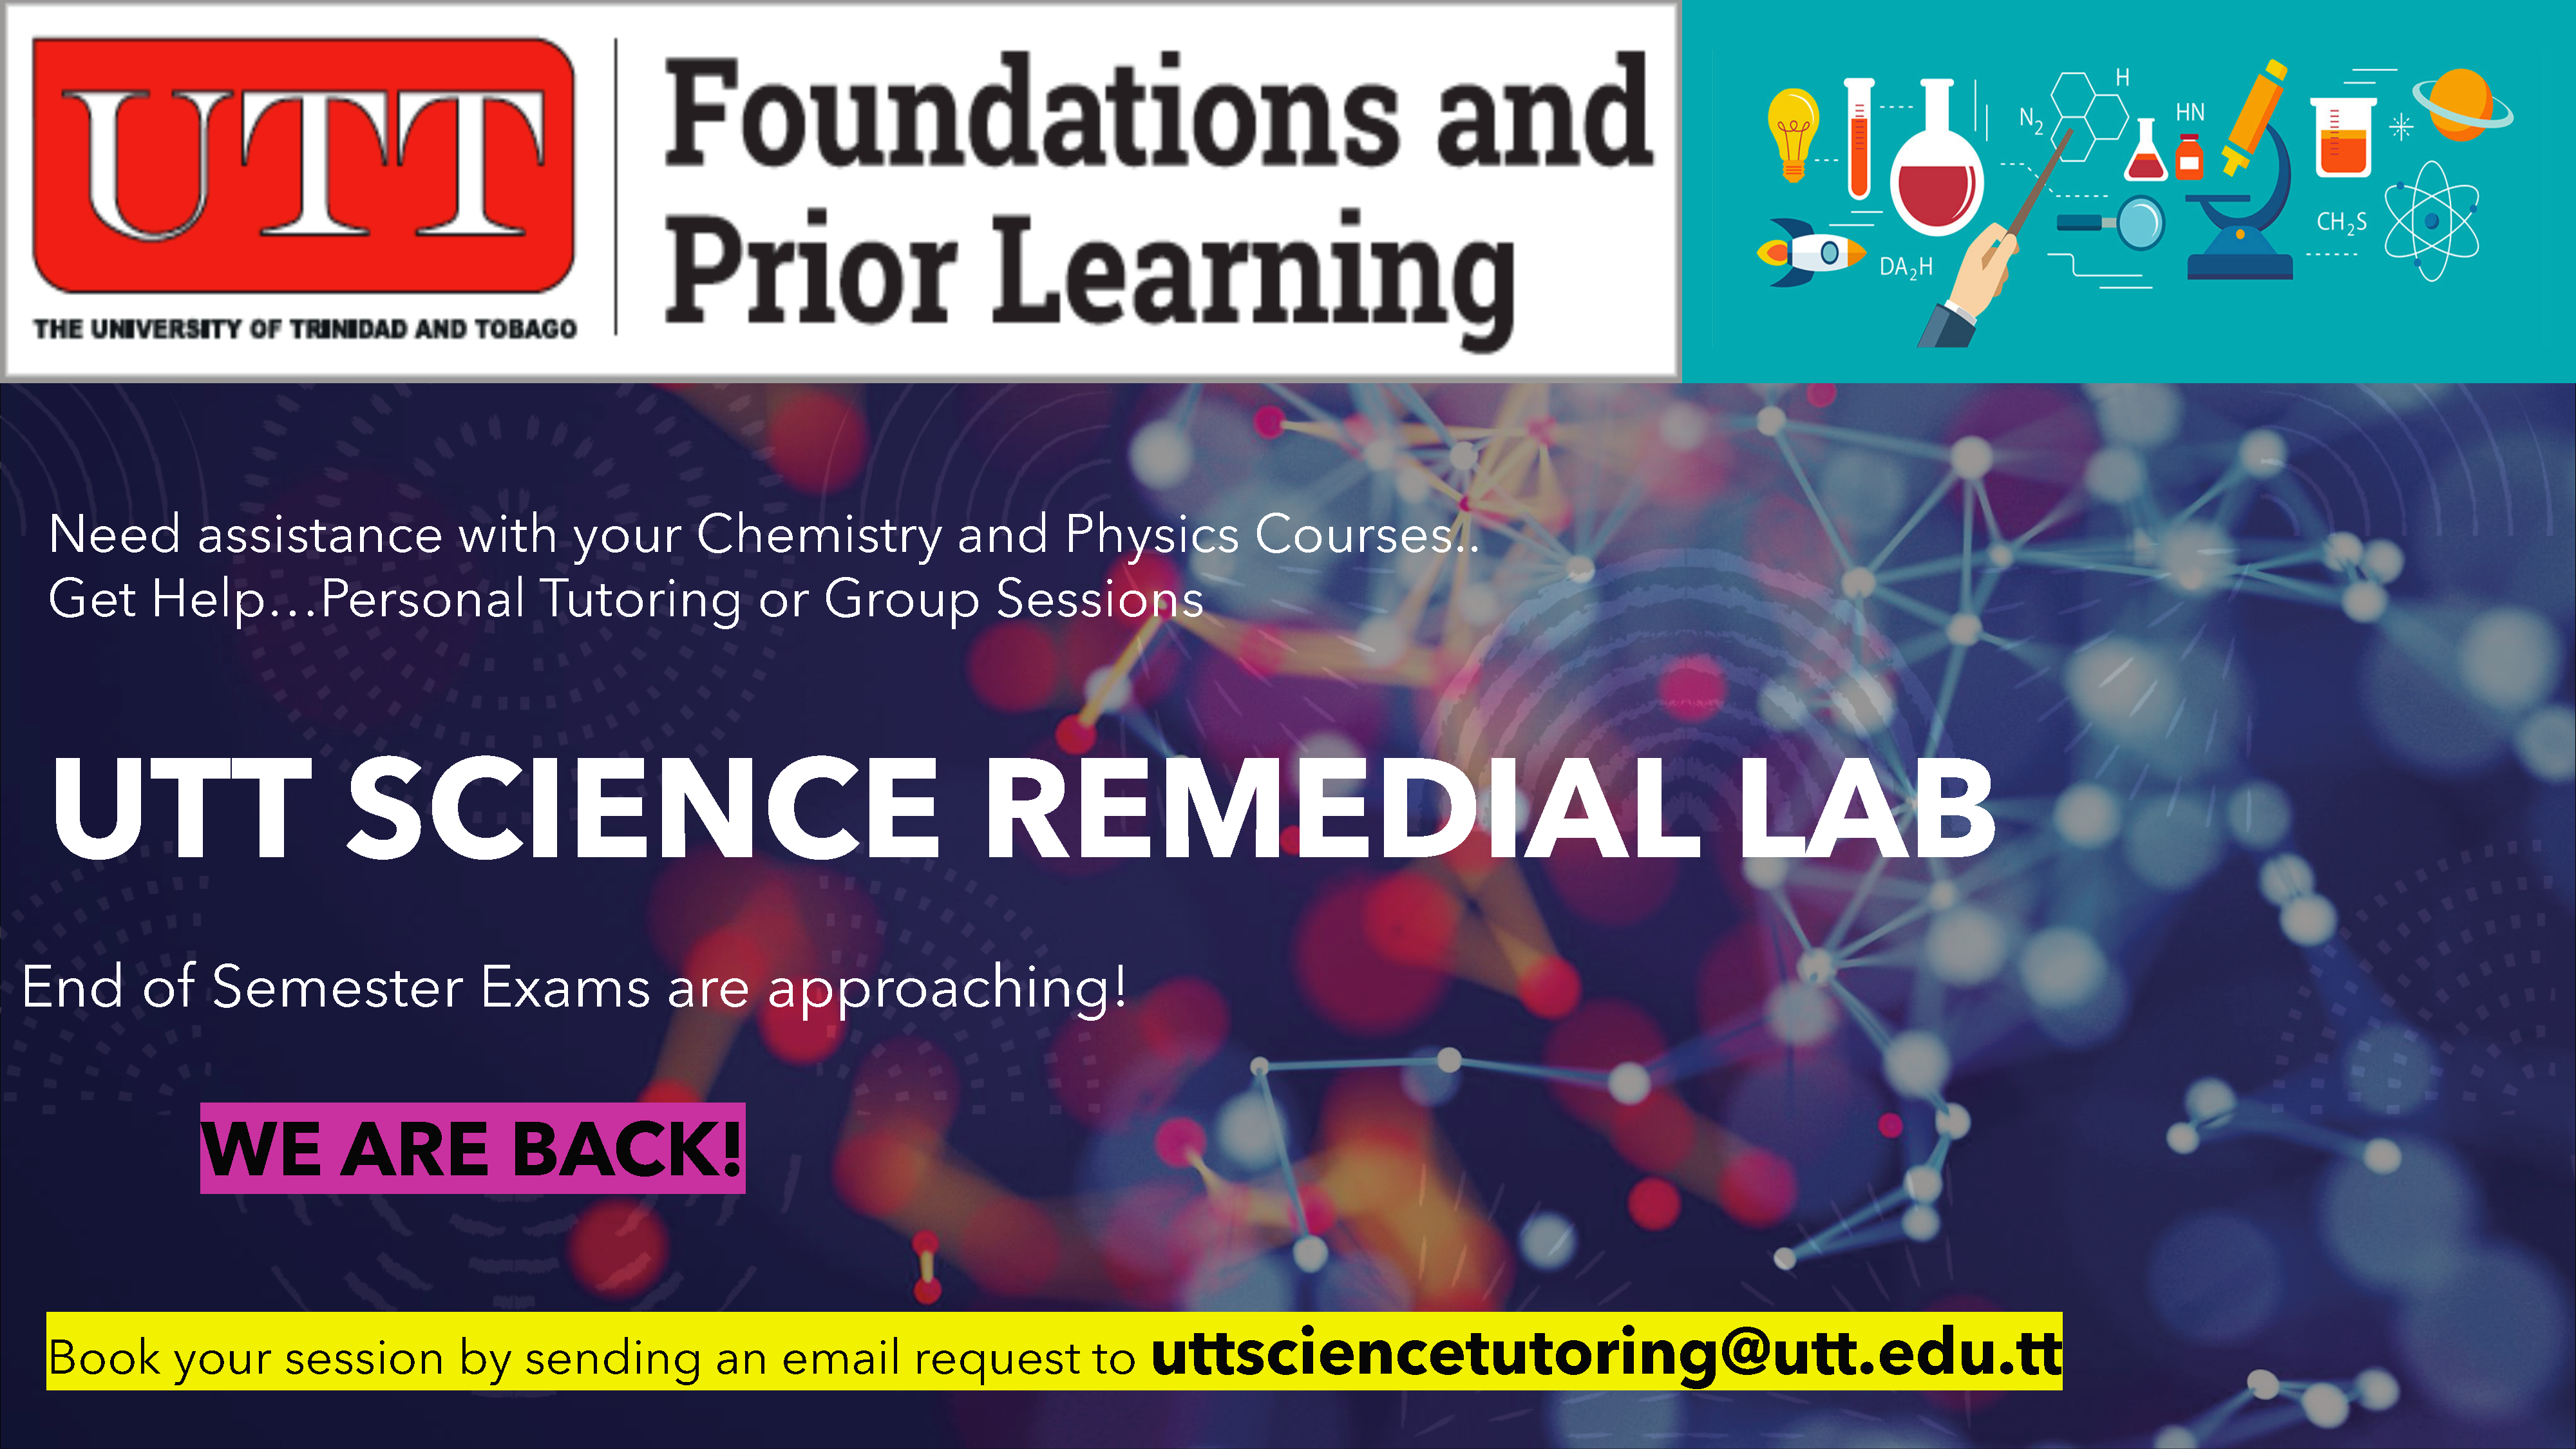 SCIENCE REMEDIAL LAB